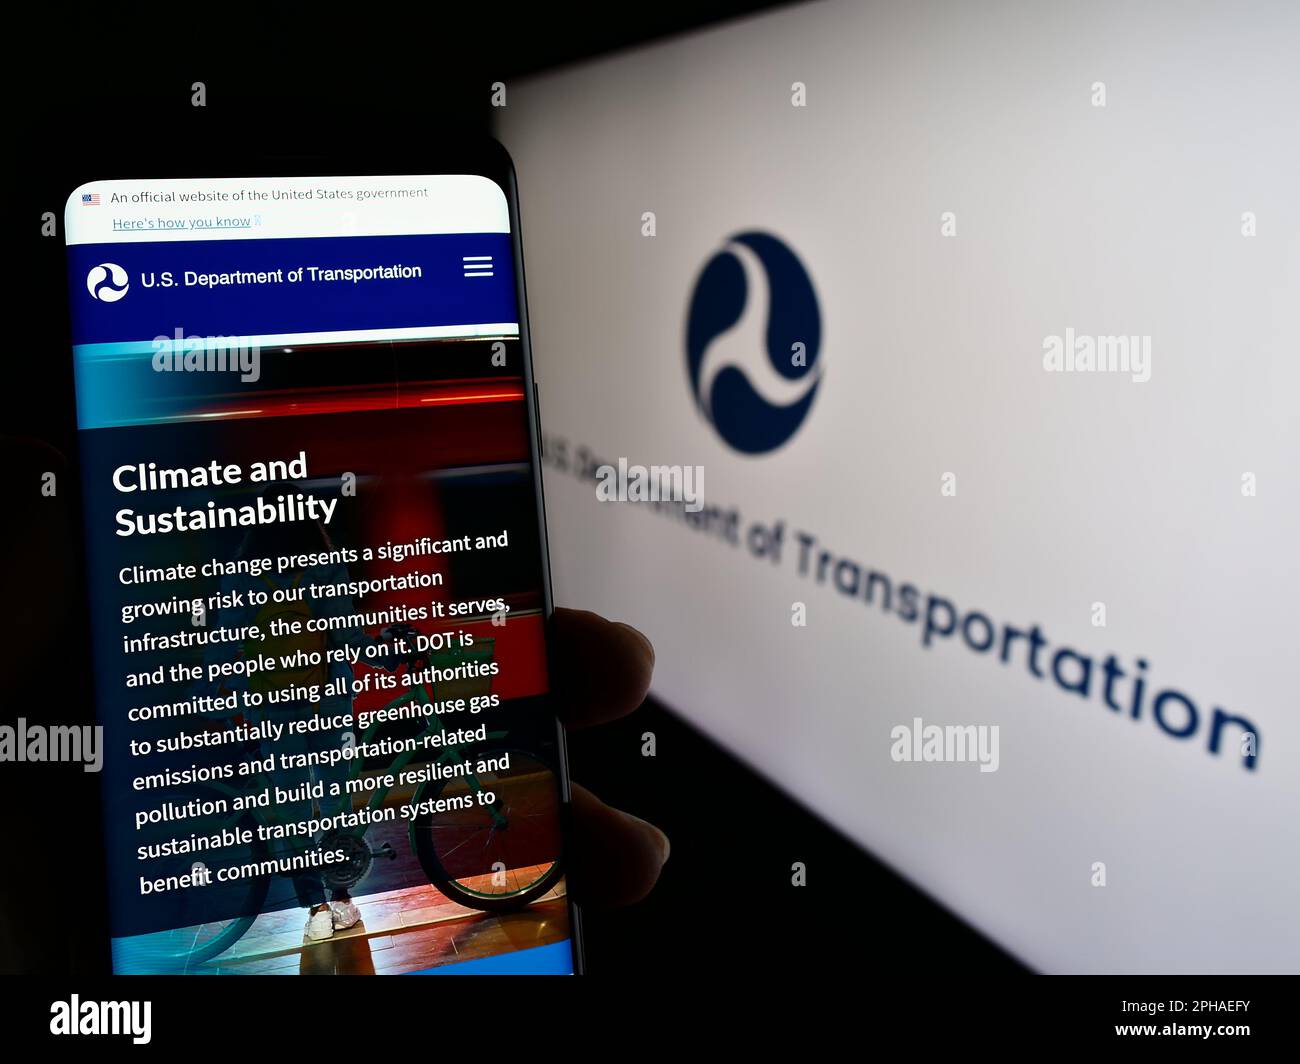 Person holding cellphone with webpage of United States Department of Transportation (USDOT) on screen with logo. Focus on center of phone display. Stock Photo